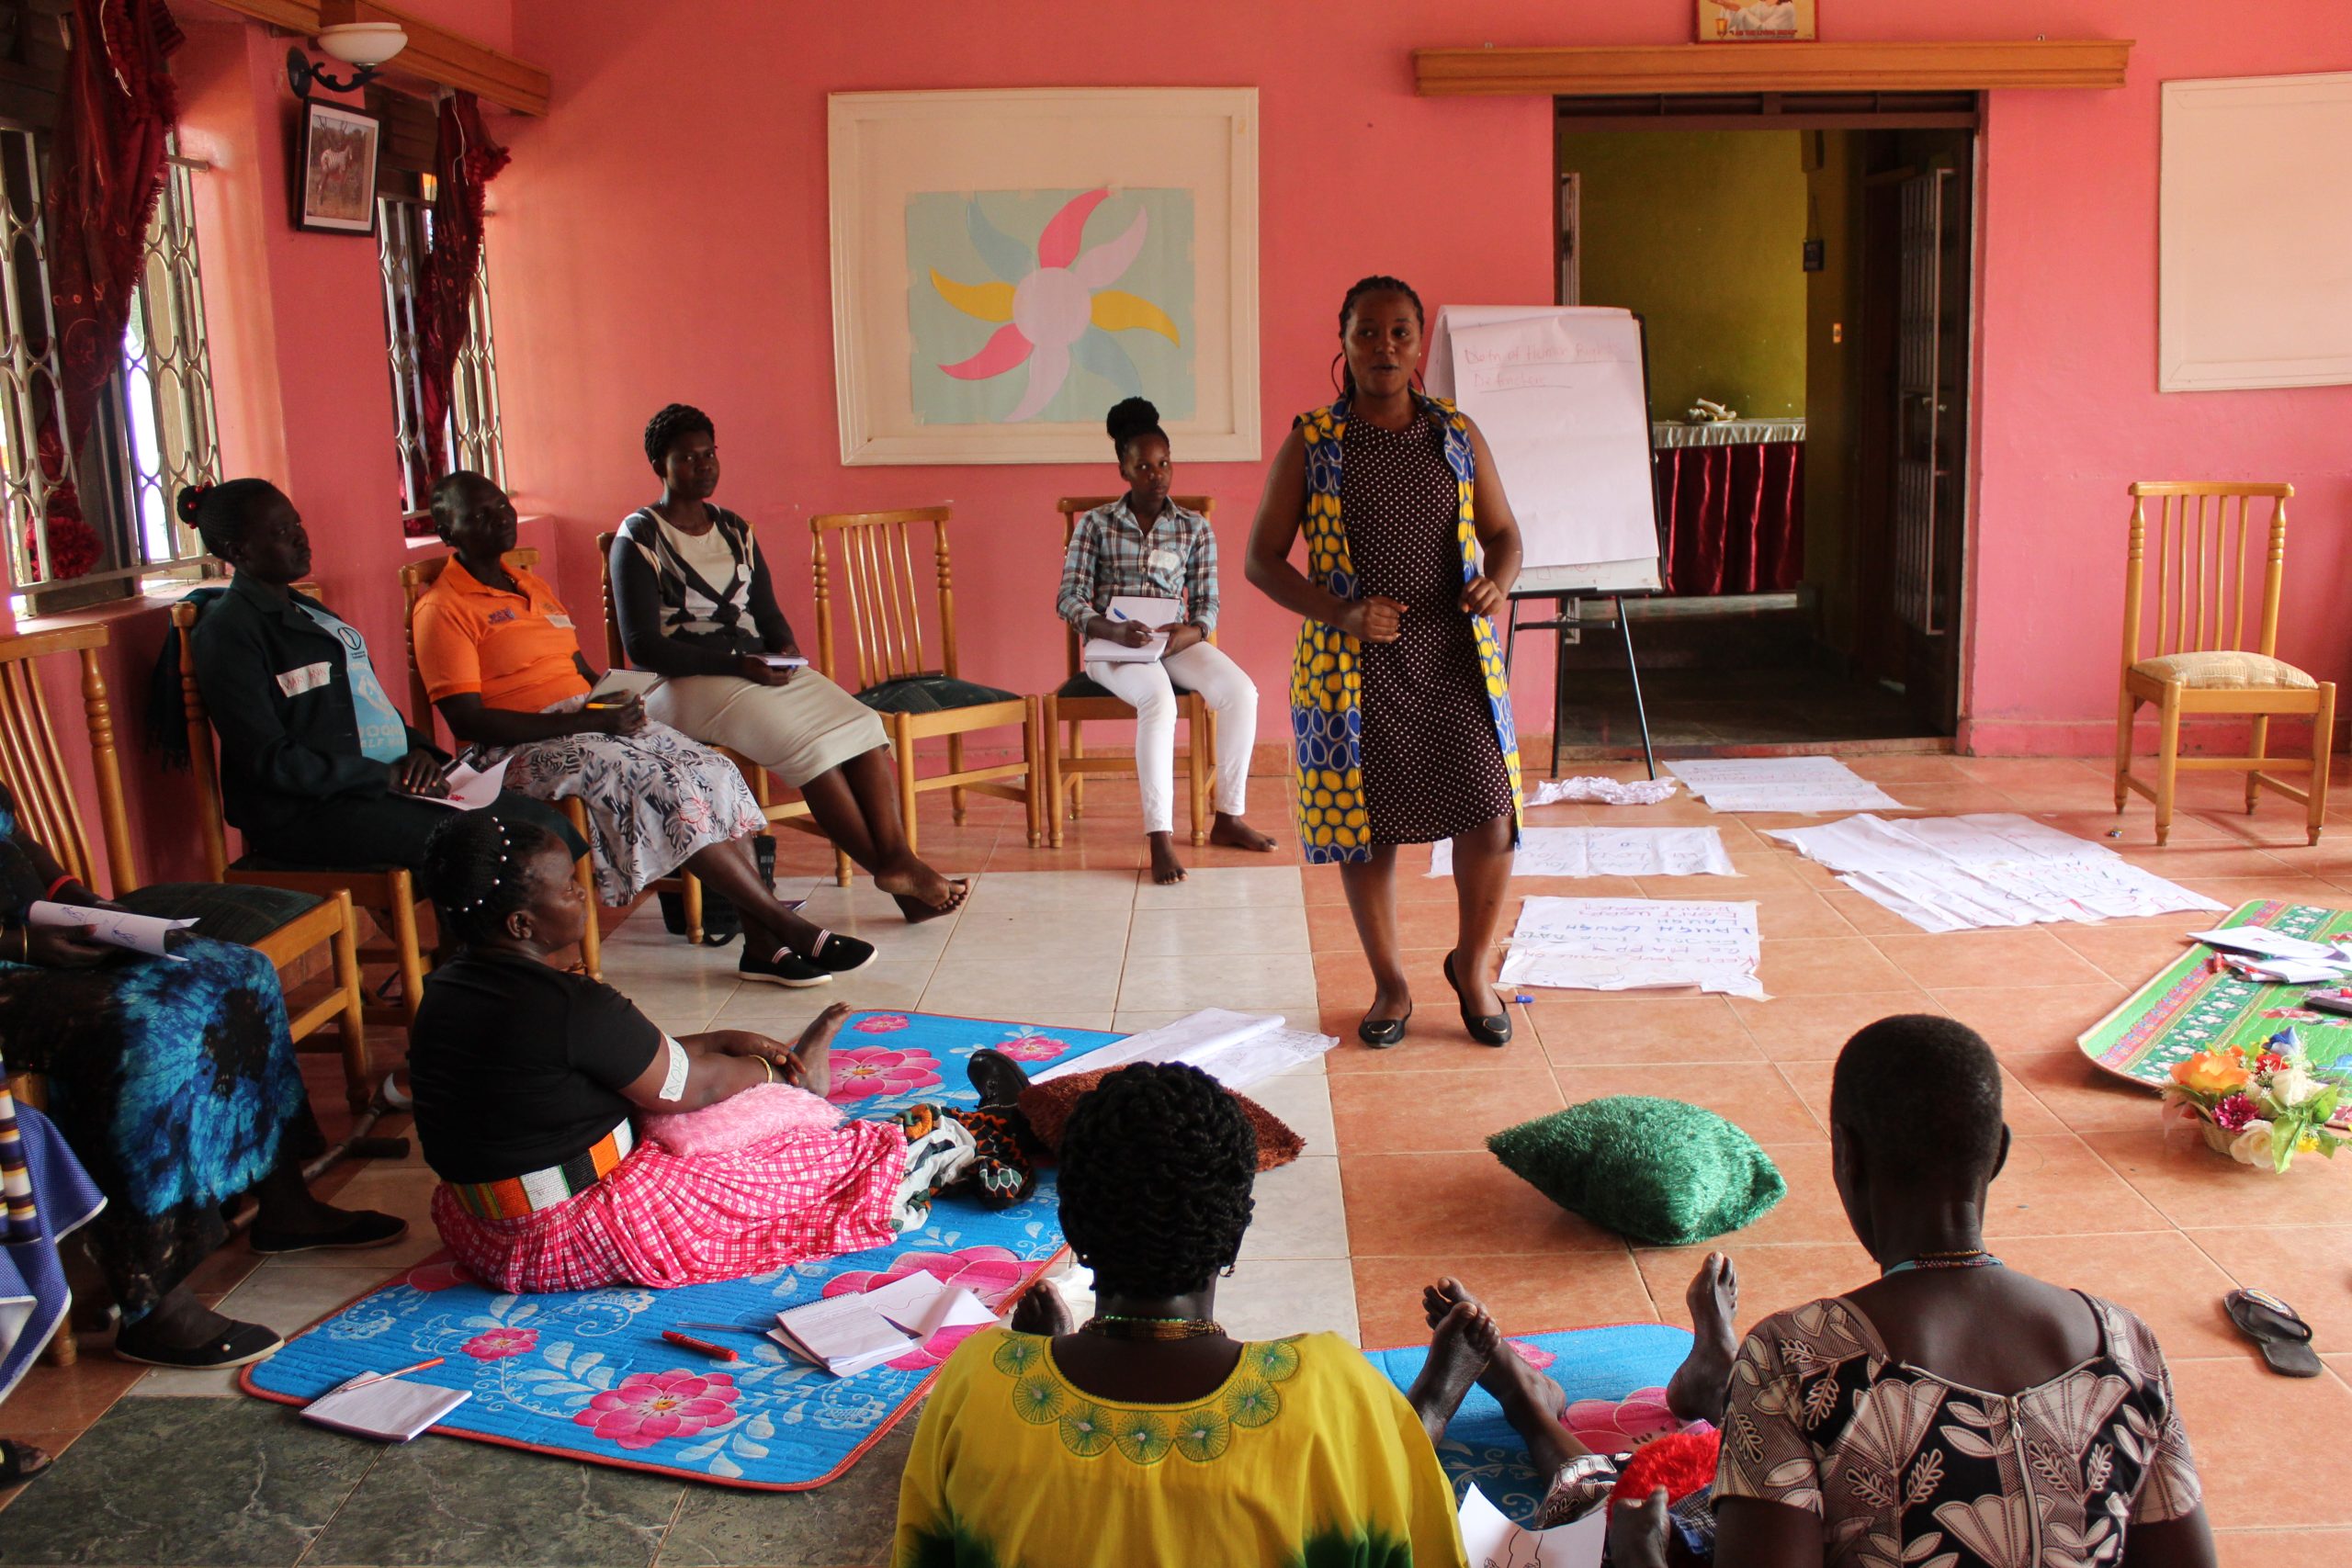 Bonita Asingwire facilitates a session on Understanding who a HRD is